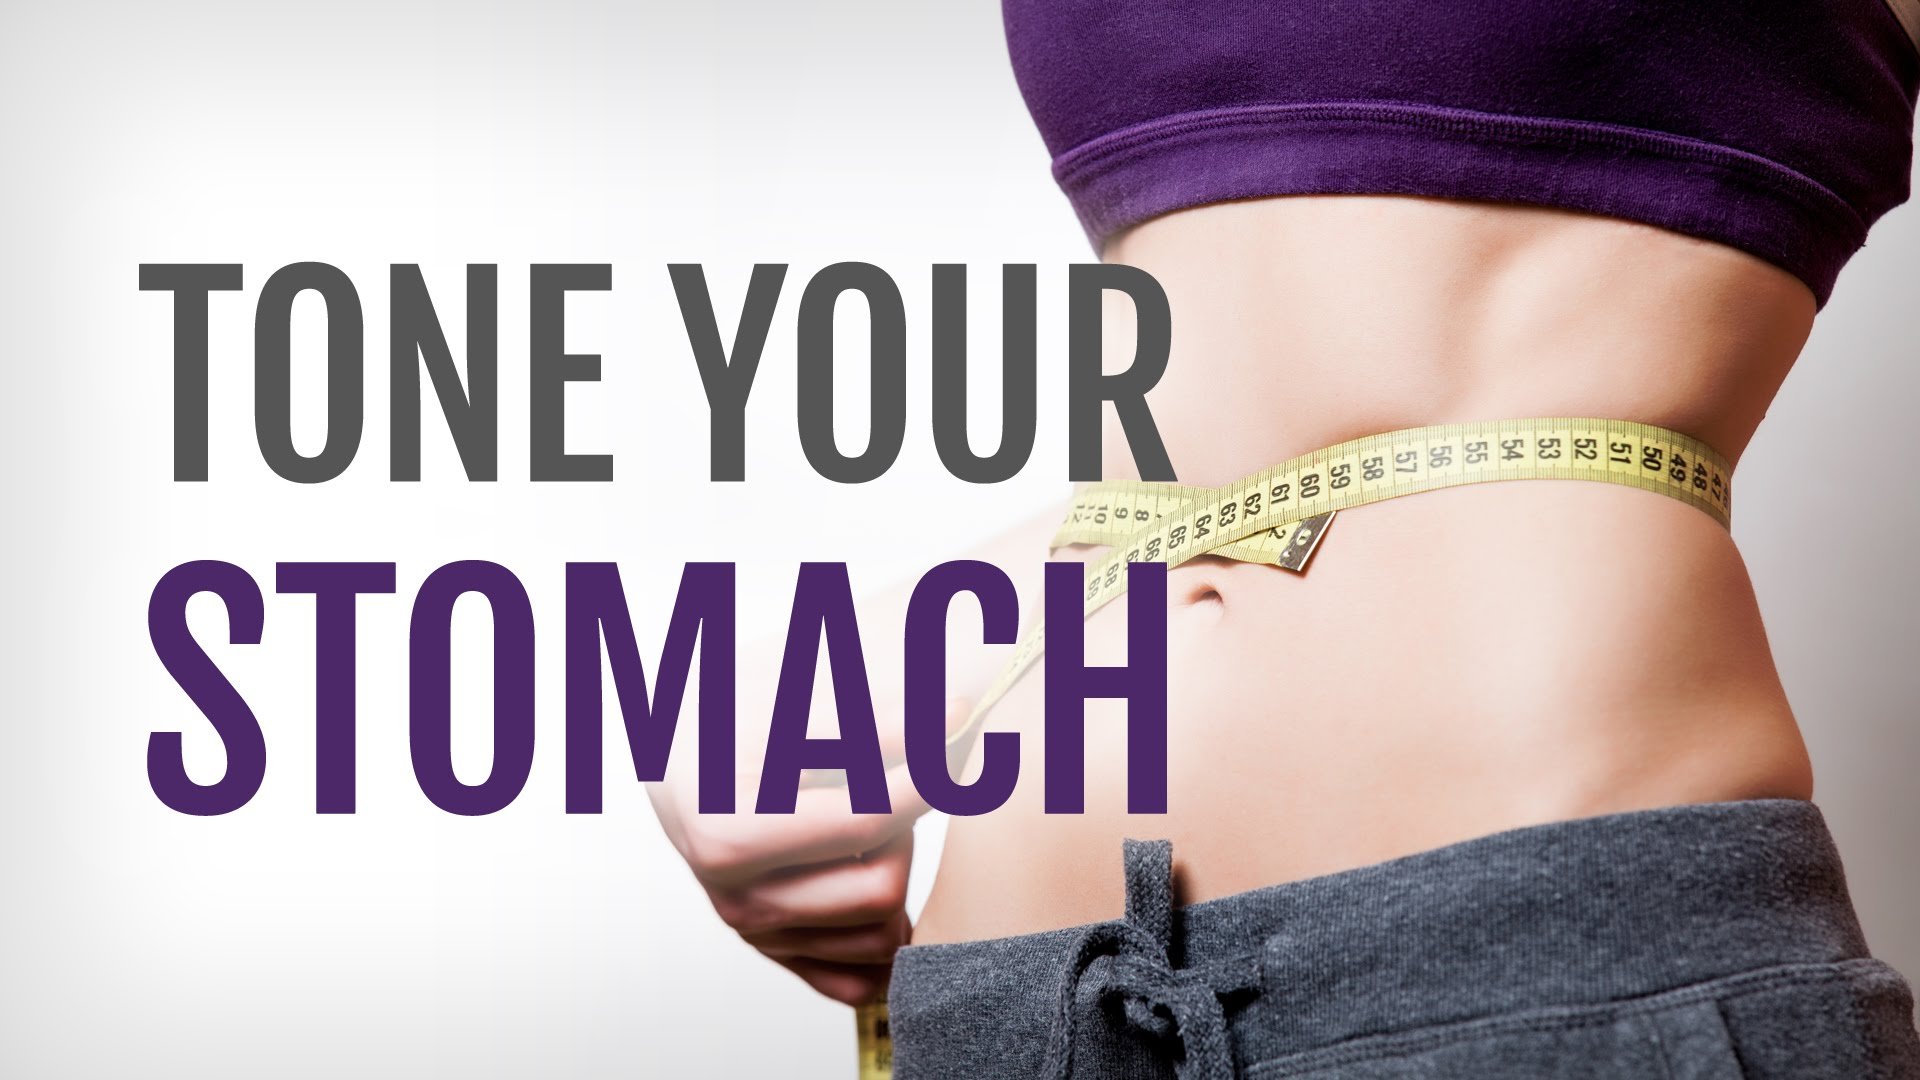 âHow to Tone Your Stomach for Womenâ? With This Core Superset Finisher ...